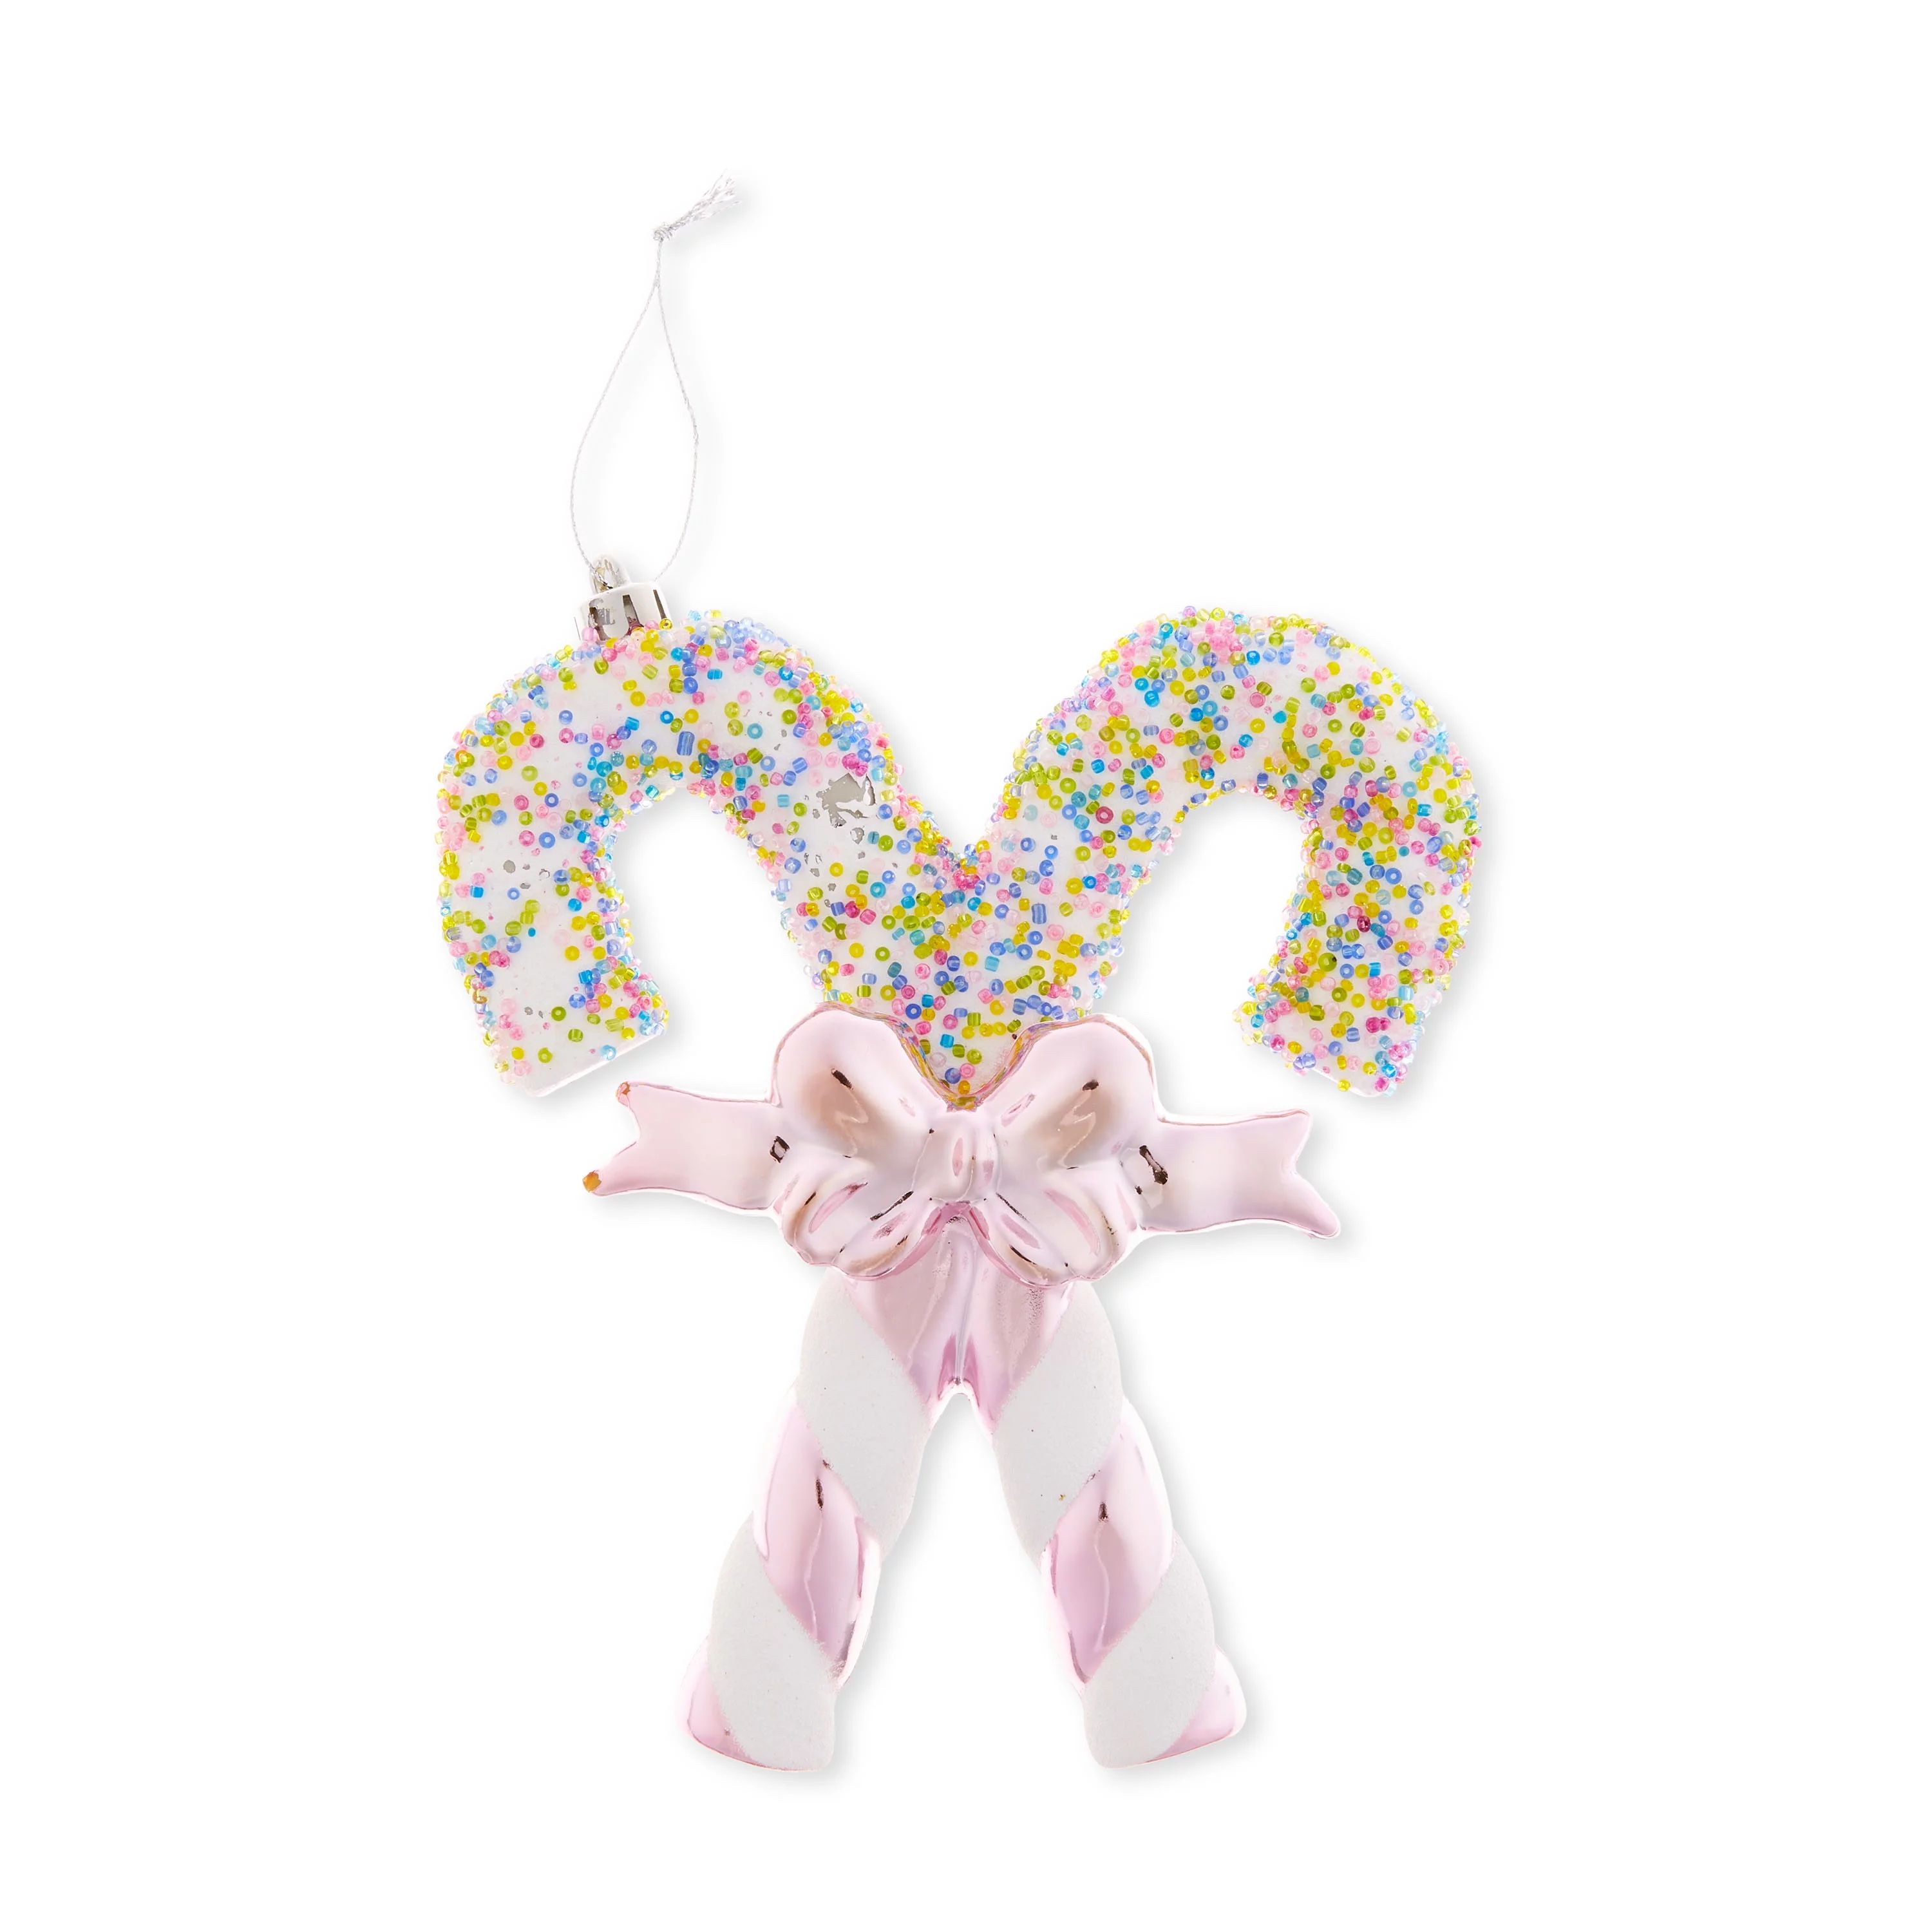 Pink and White Sprinkles Jumbo Candy Cane Decorative Ornament, 7.4 in, by Holiday Time | Walmart (US)